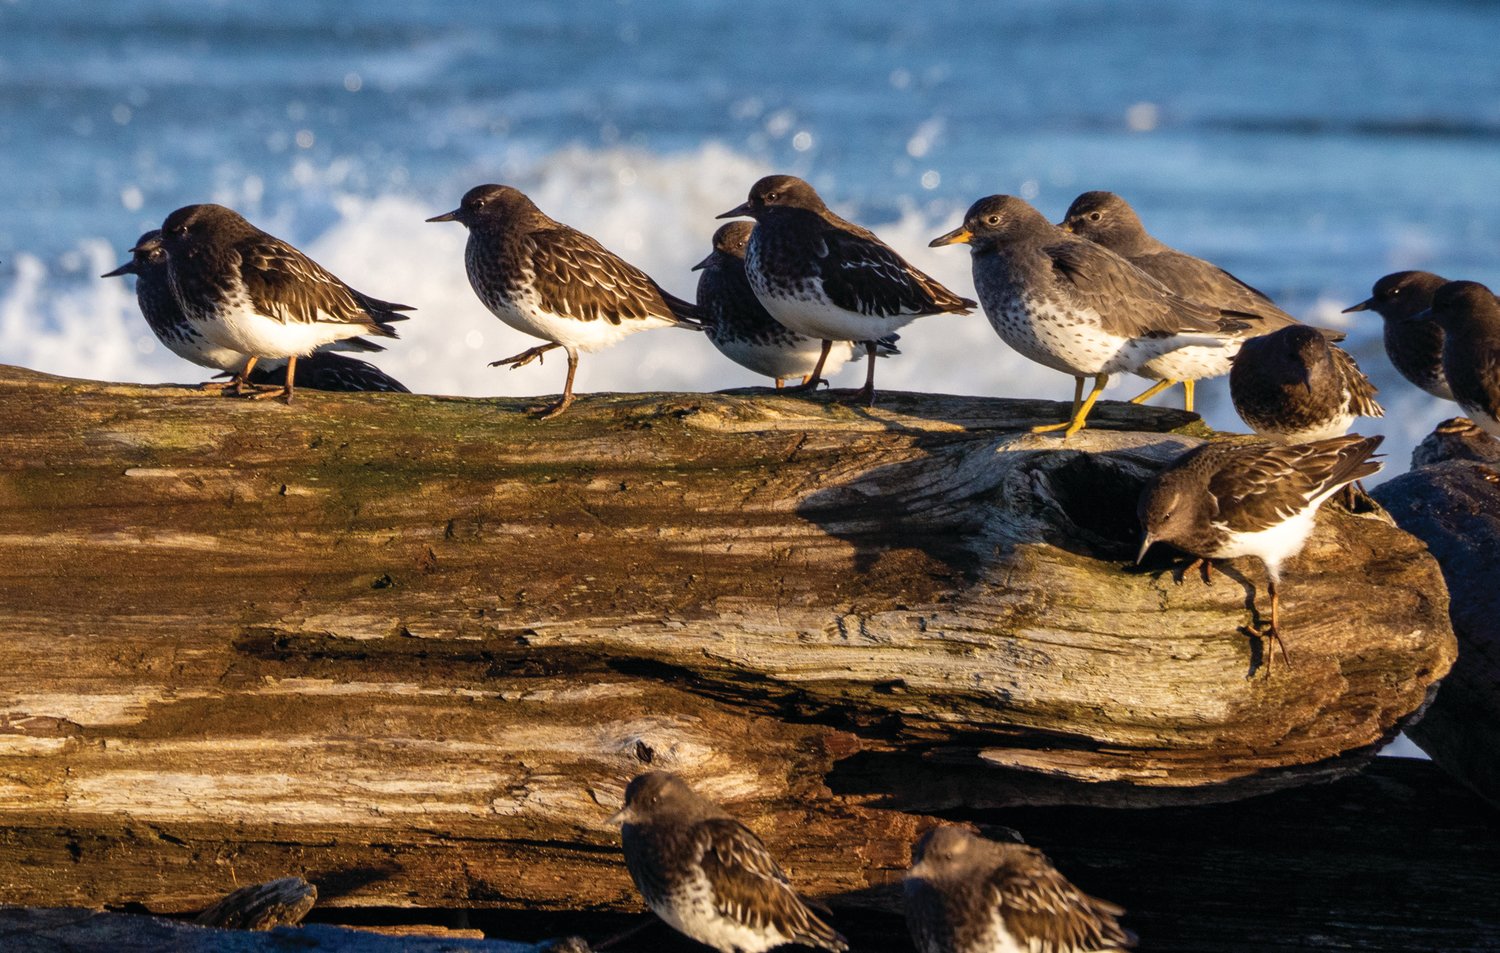 Shorebirds overwintering at Point Hudson have flown thousands of miles from their Arctic breeding grounds on the coast of Alaska. Here, a mixed group includes Turnstones, Surfbirds, Sanderlings, and Dunlin.